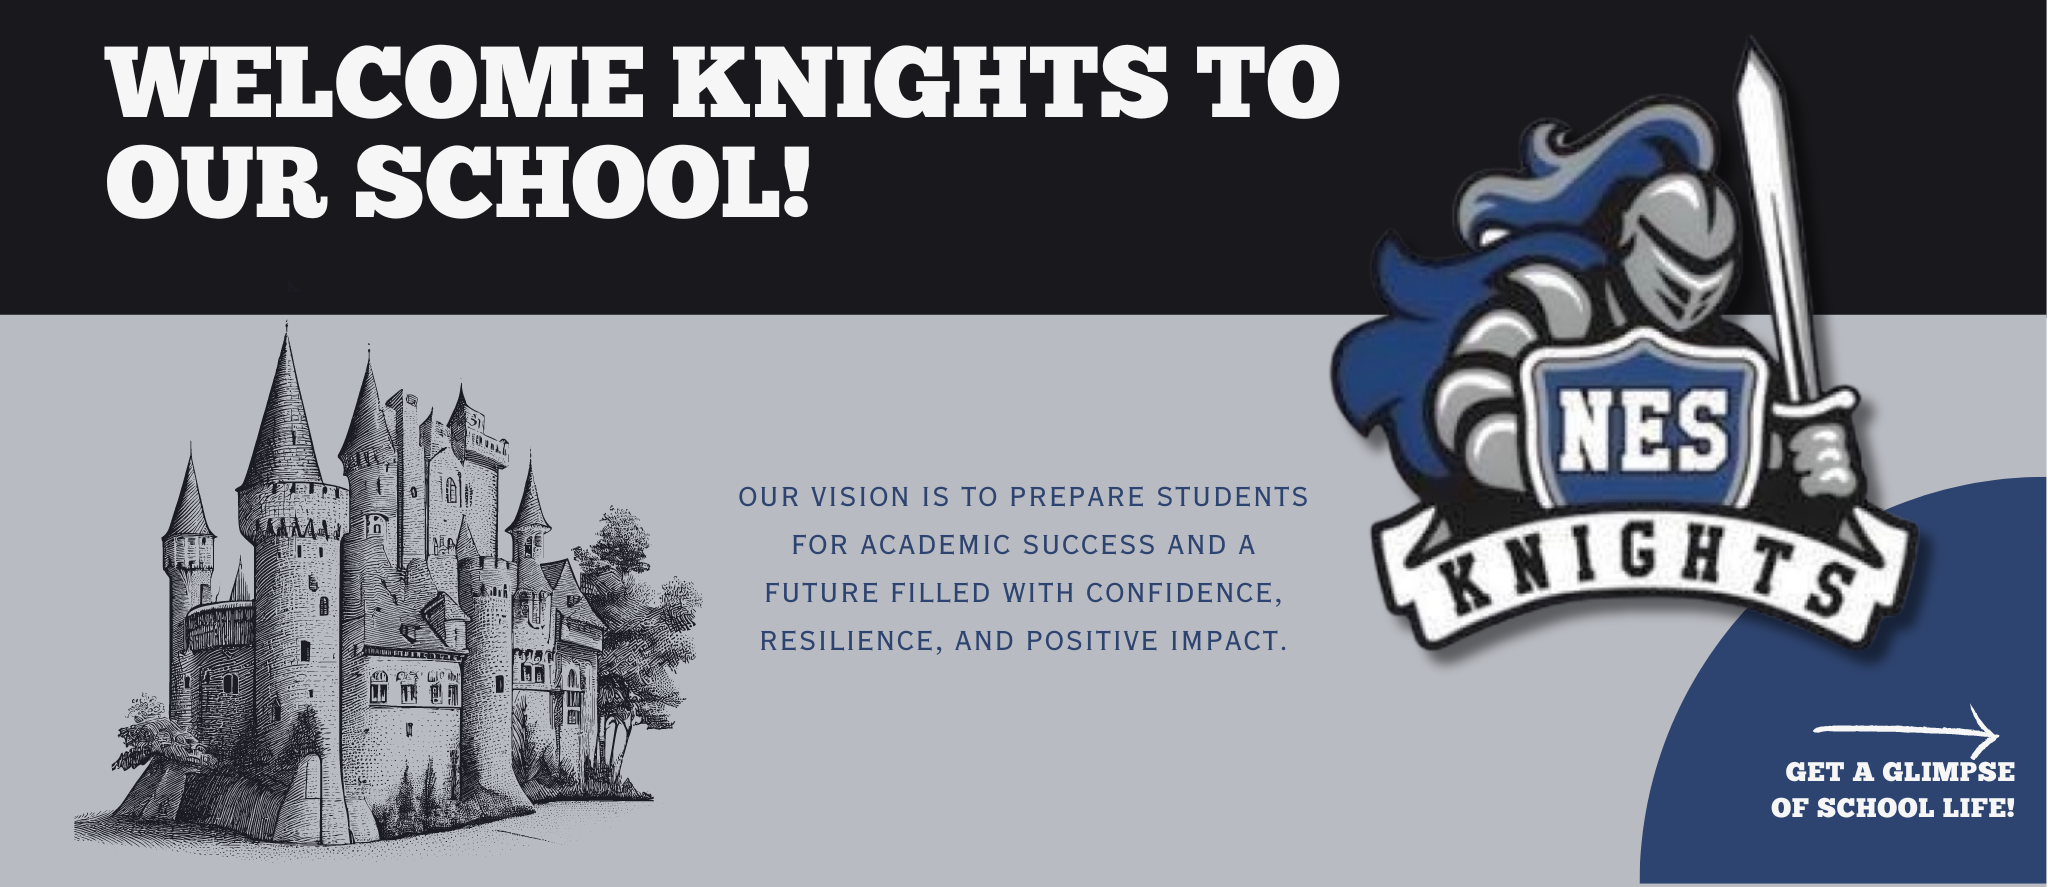 Welcome Knights to our school!